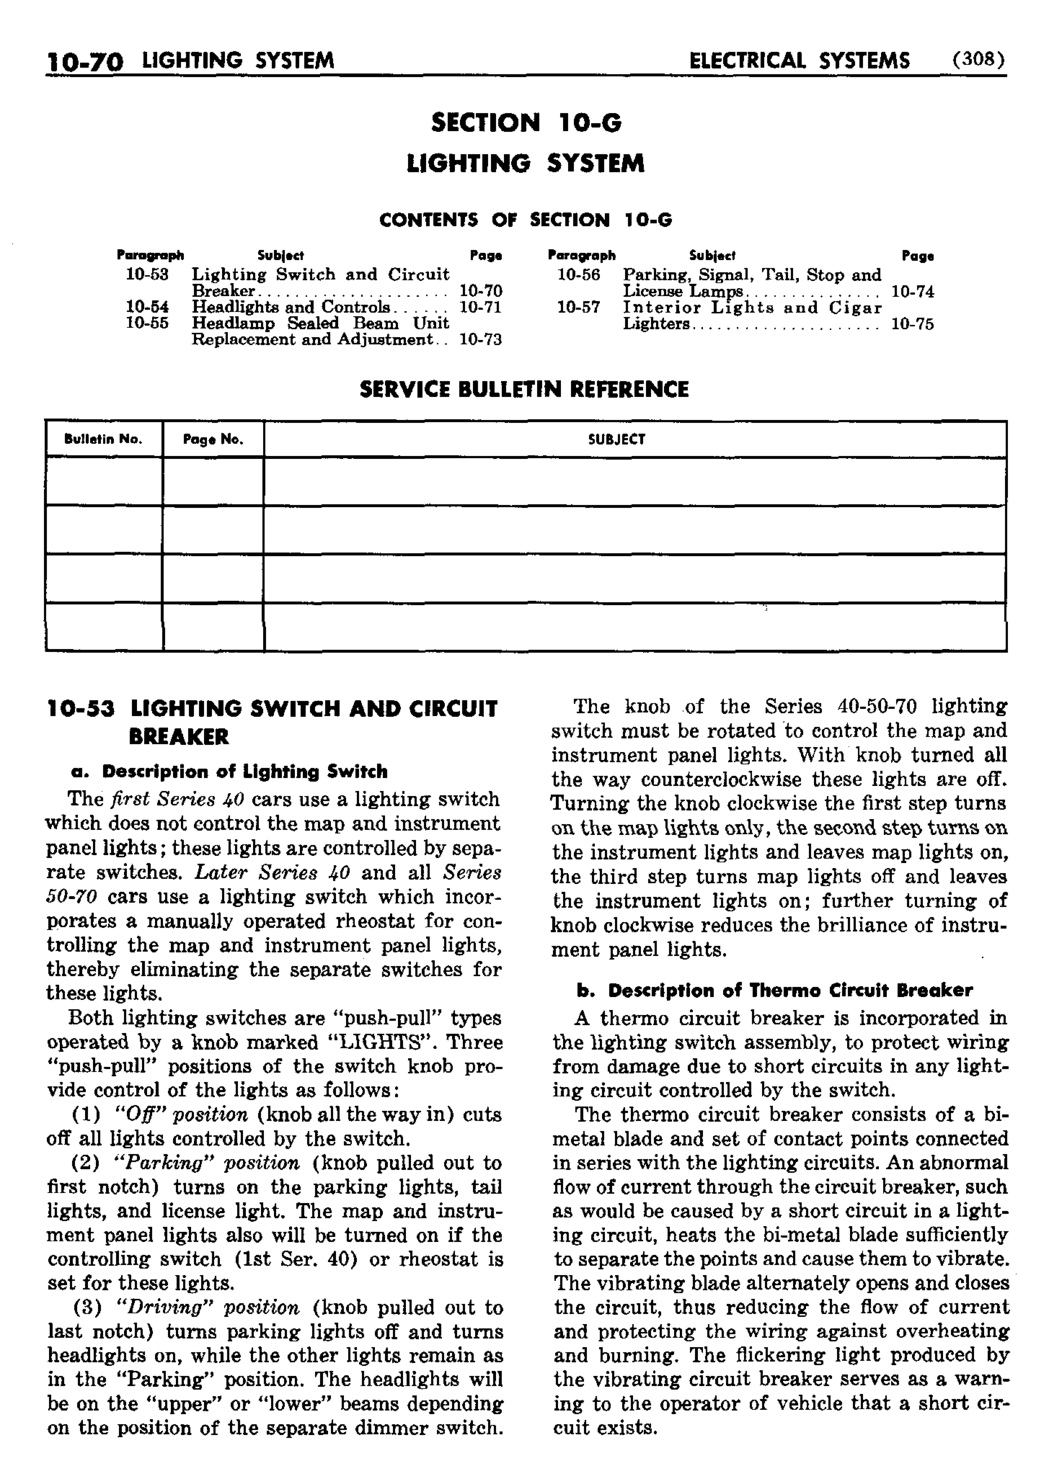 n_11 1950 Buick Shop Manual - Electrical Systems-070-070.jpg